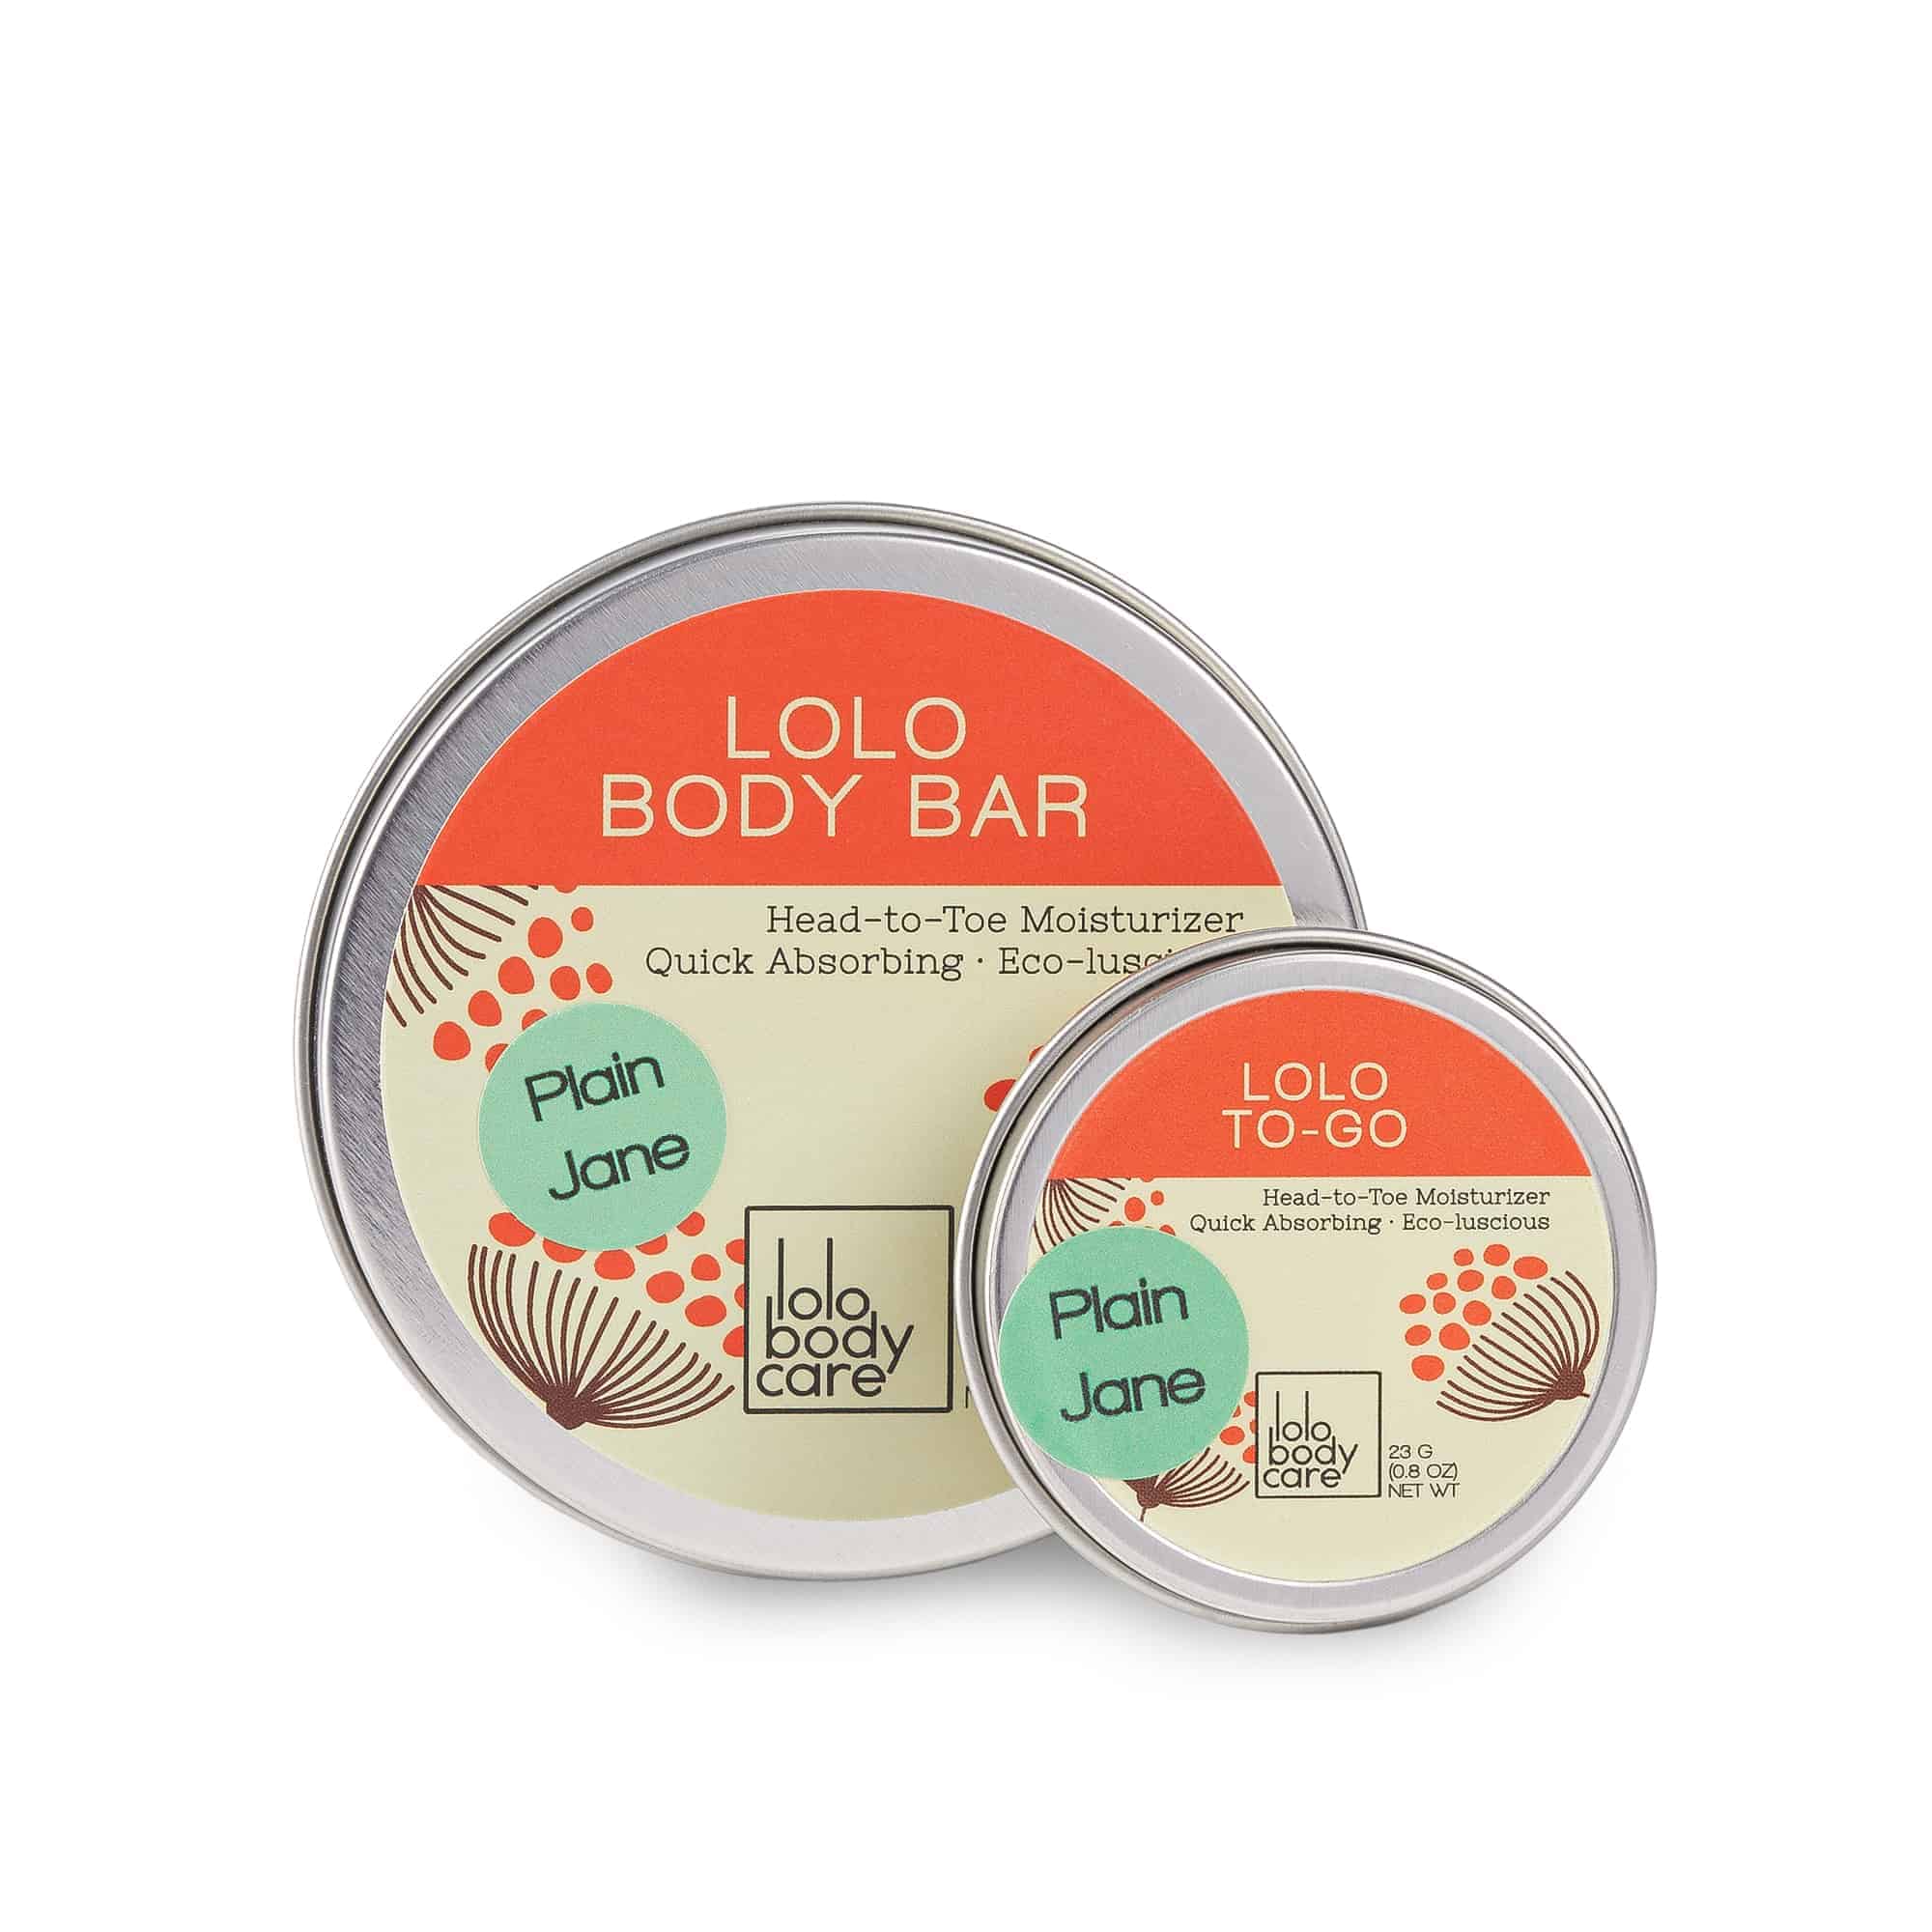 Tins of body butter with orange and aqua accents.